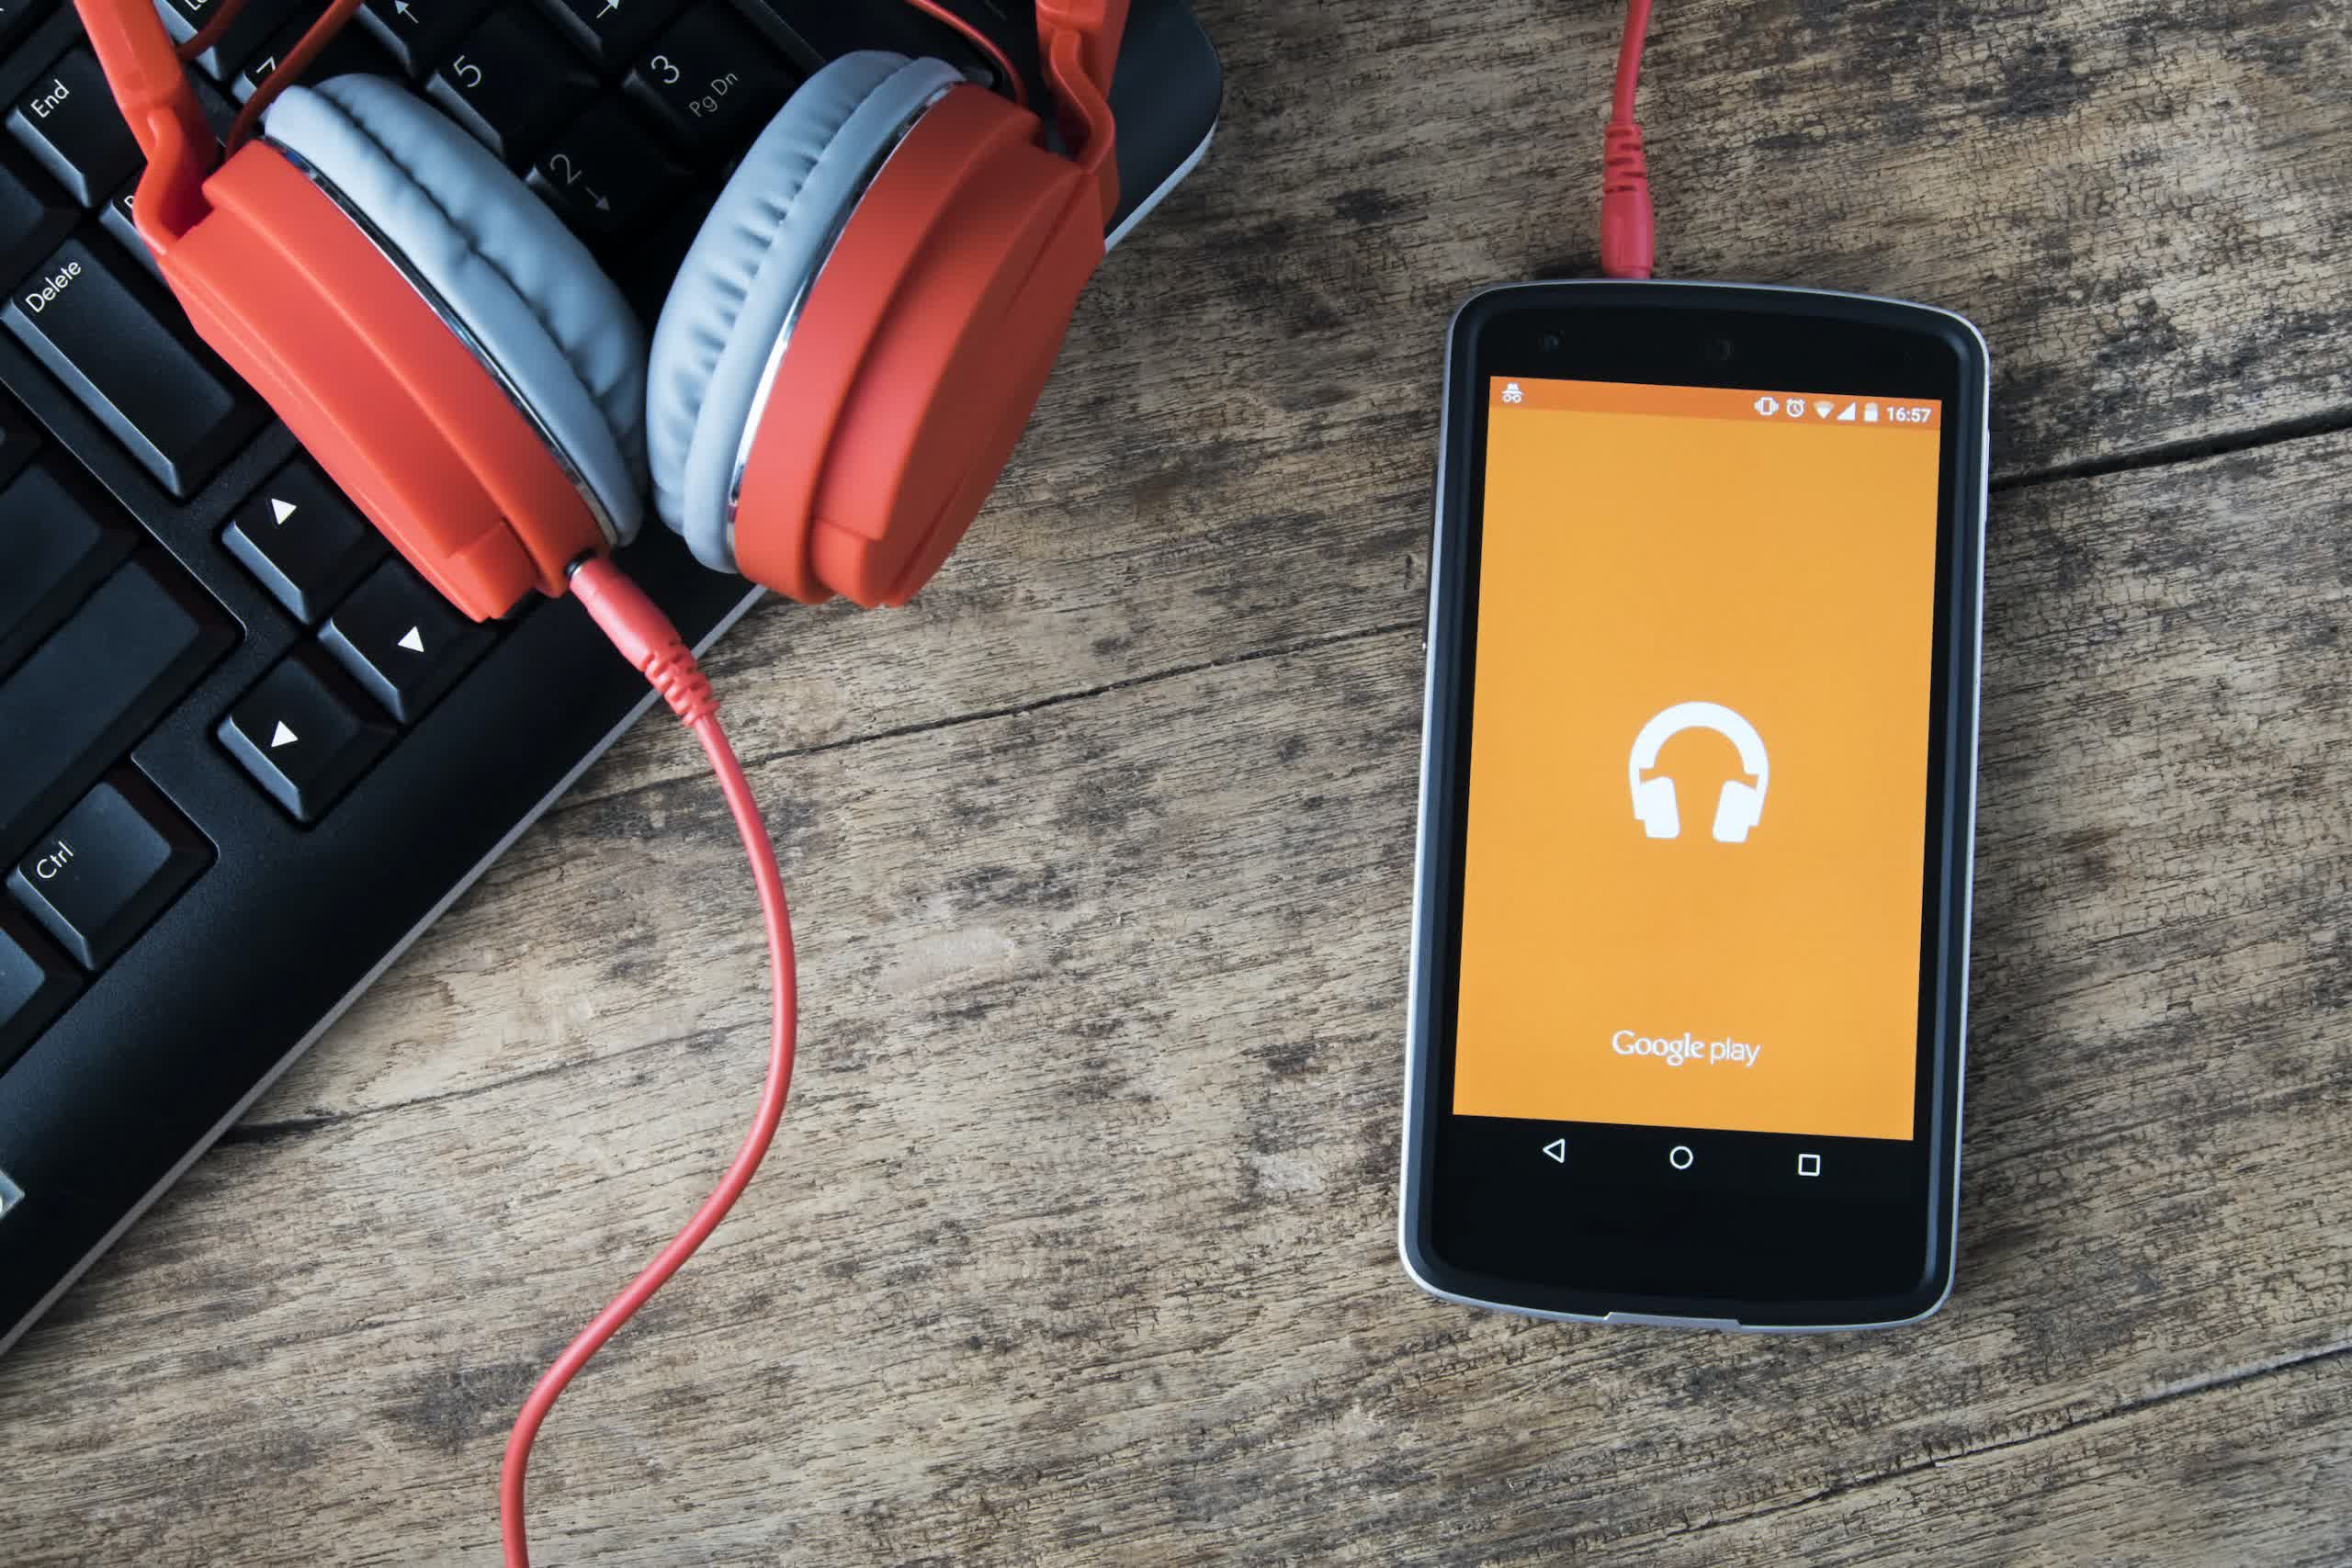 Google Play Music is officially out-of-service in some regions including the US